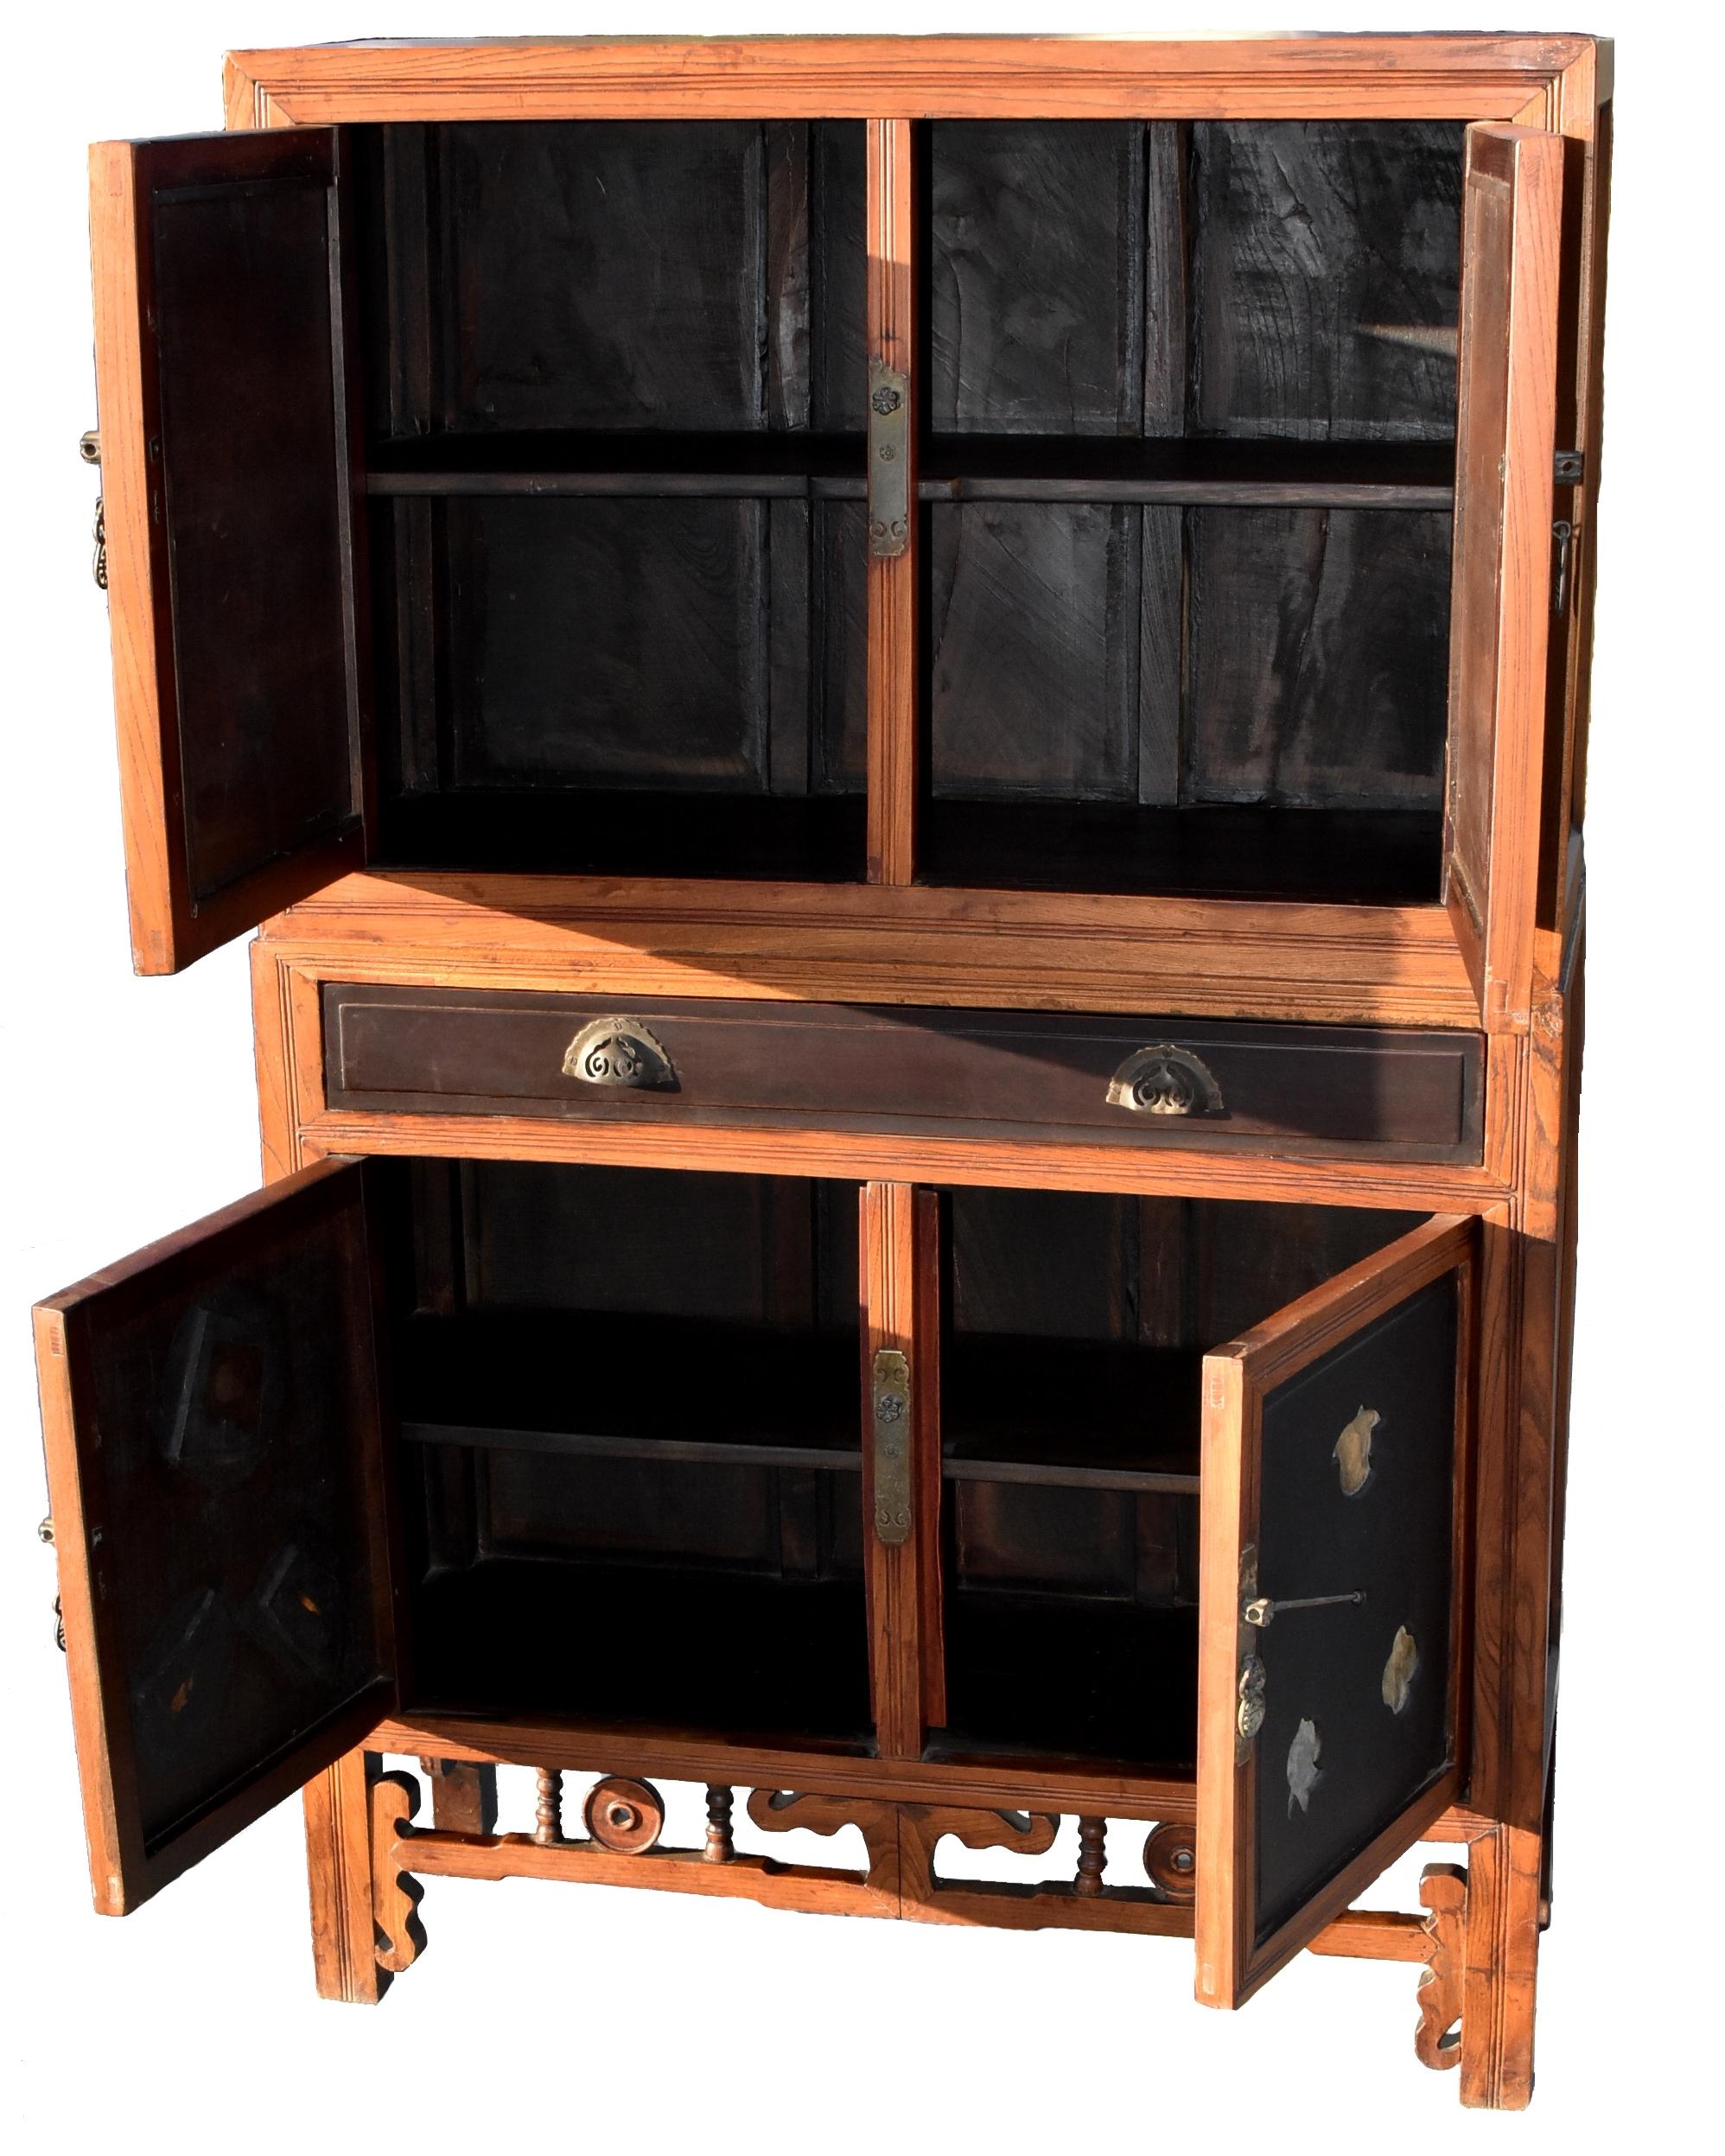 Antique Chinese Scholar's Mirrored Bookcase with Marble Insets In Good Condition For Sale In Somis, CA